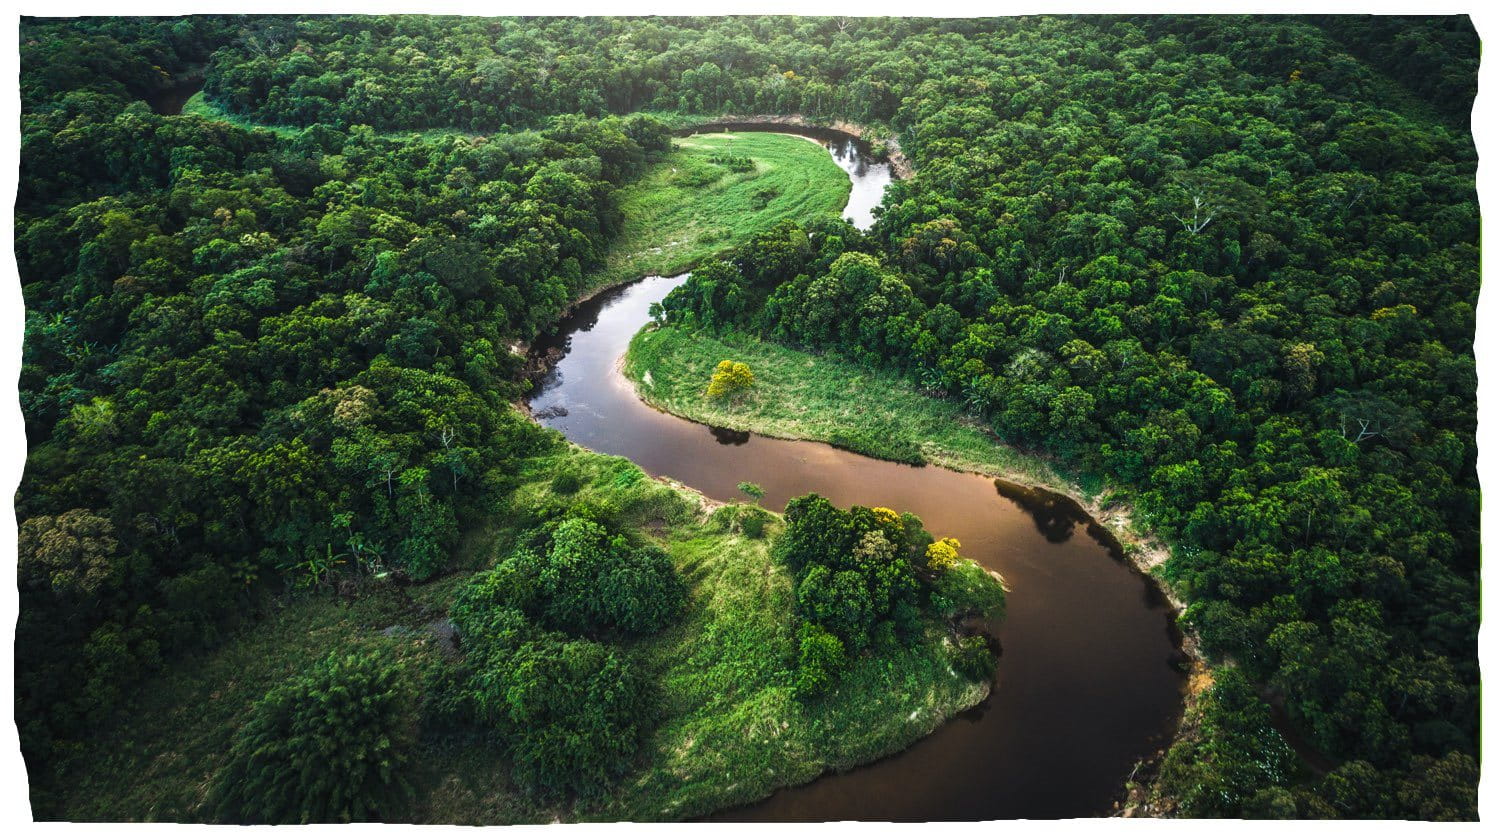 A river meandering through a lush forest.